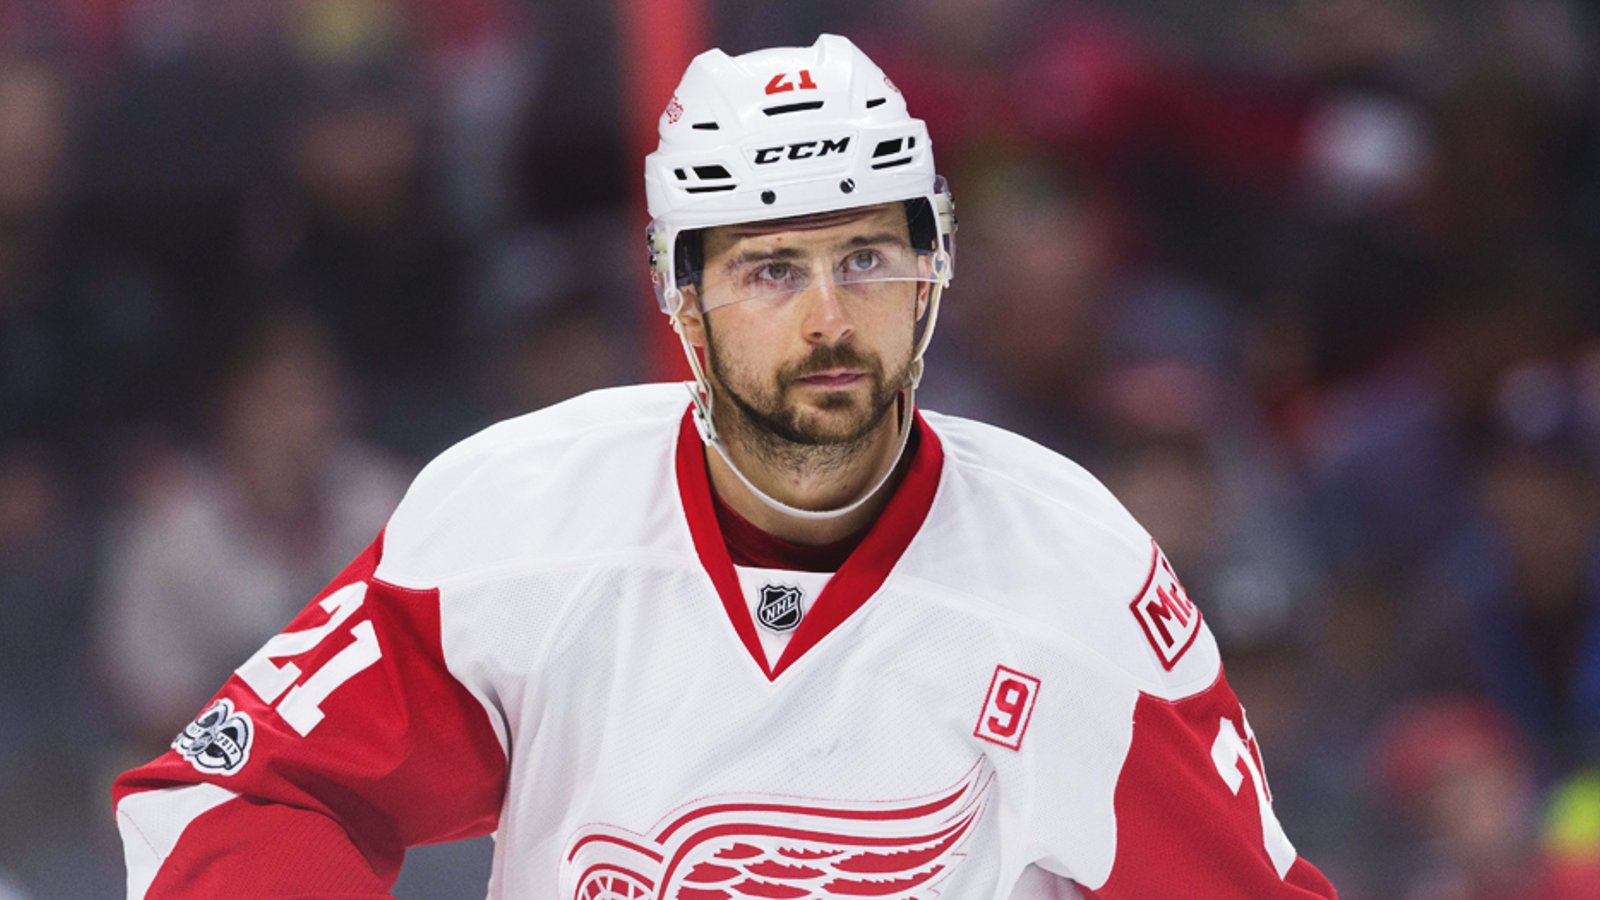 Report: Tatar publicly comments his relationship with Holland​ following arbitration.